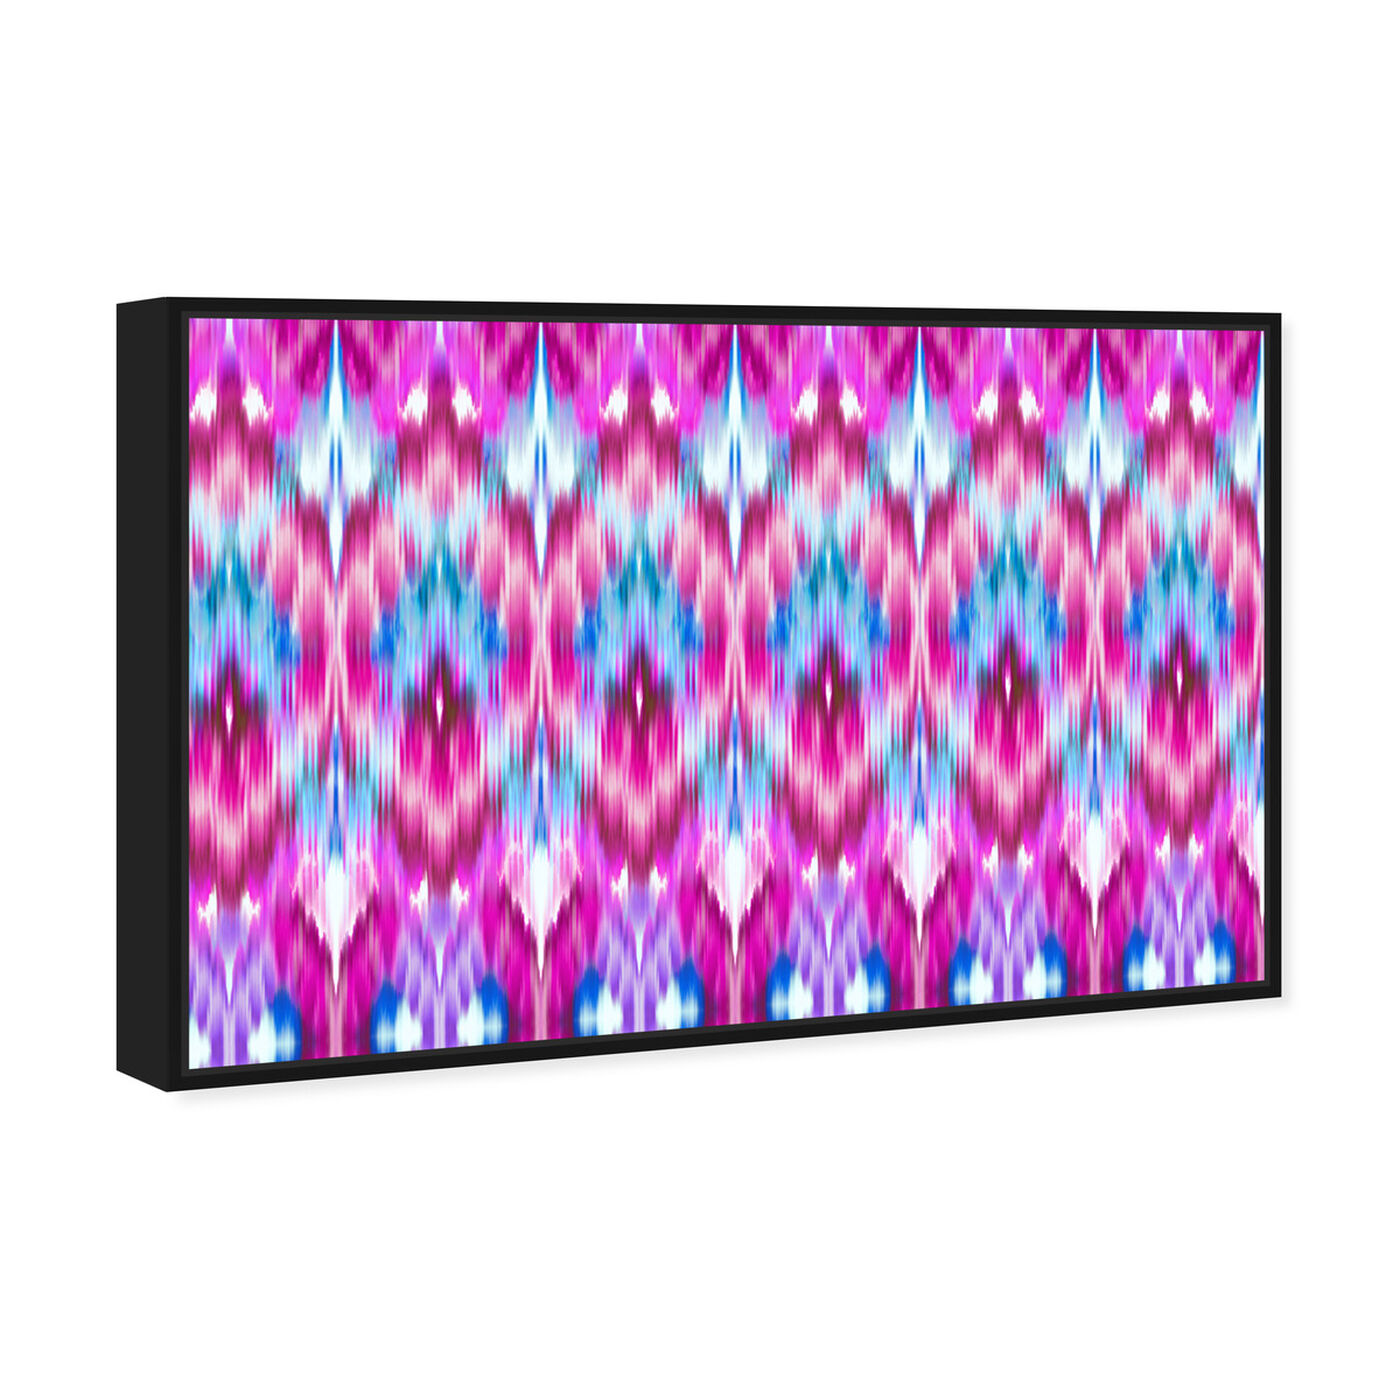 Angled view of Hotter than Hot Pink featuring abstract and patterns art.